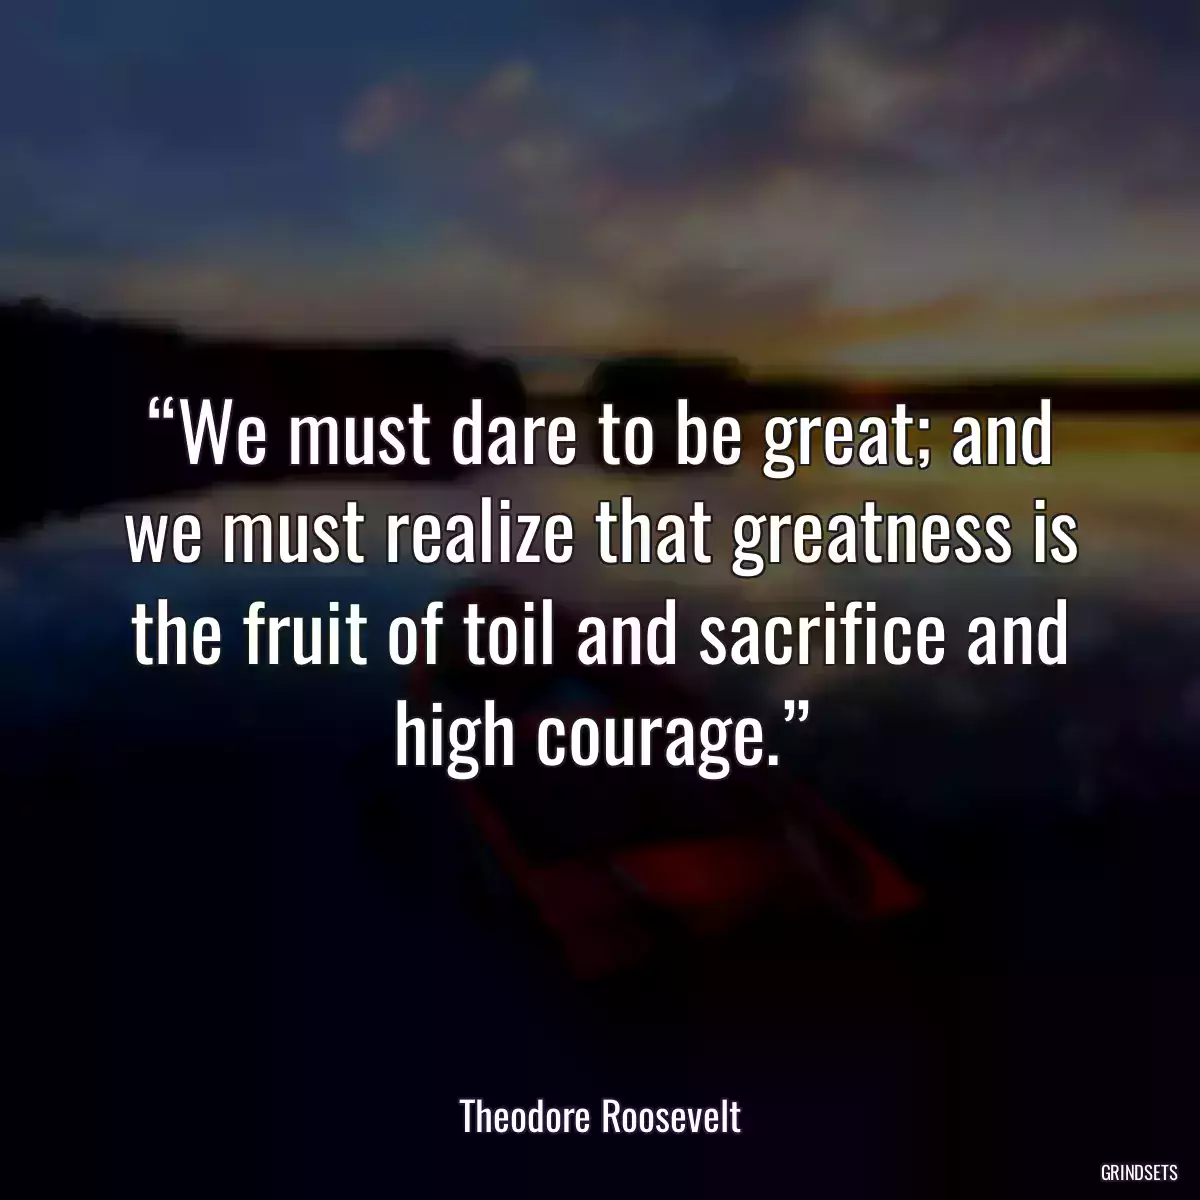 “We must dare to be great; and we must realize that greatness is the fruit of toil and sacrifice and high courage.”